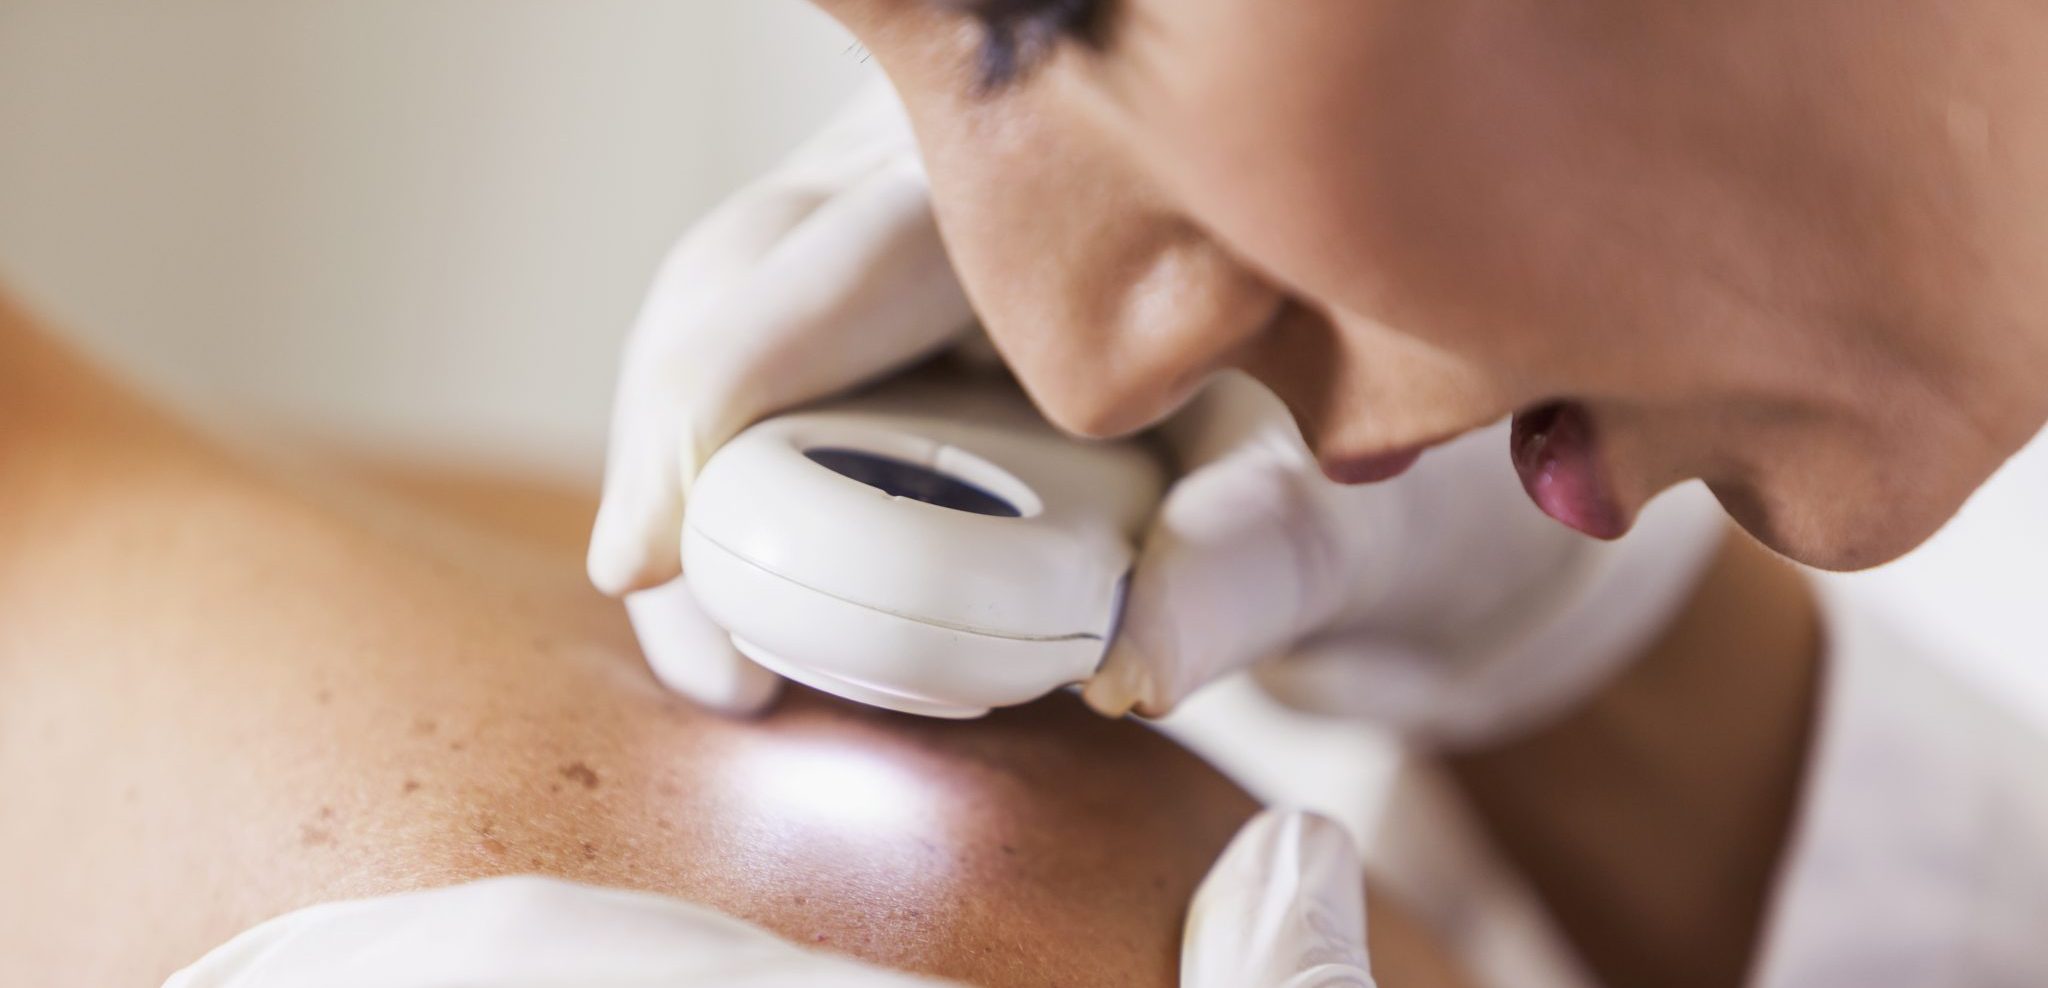 What to Watch Out For – Early Signs of Skin Cancer